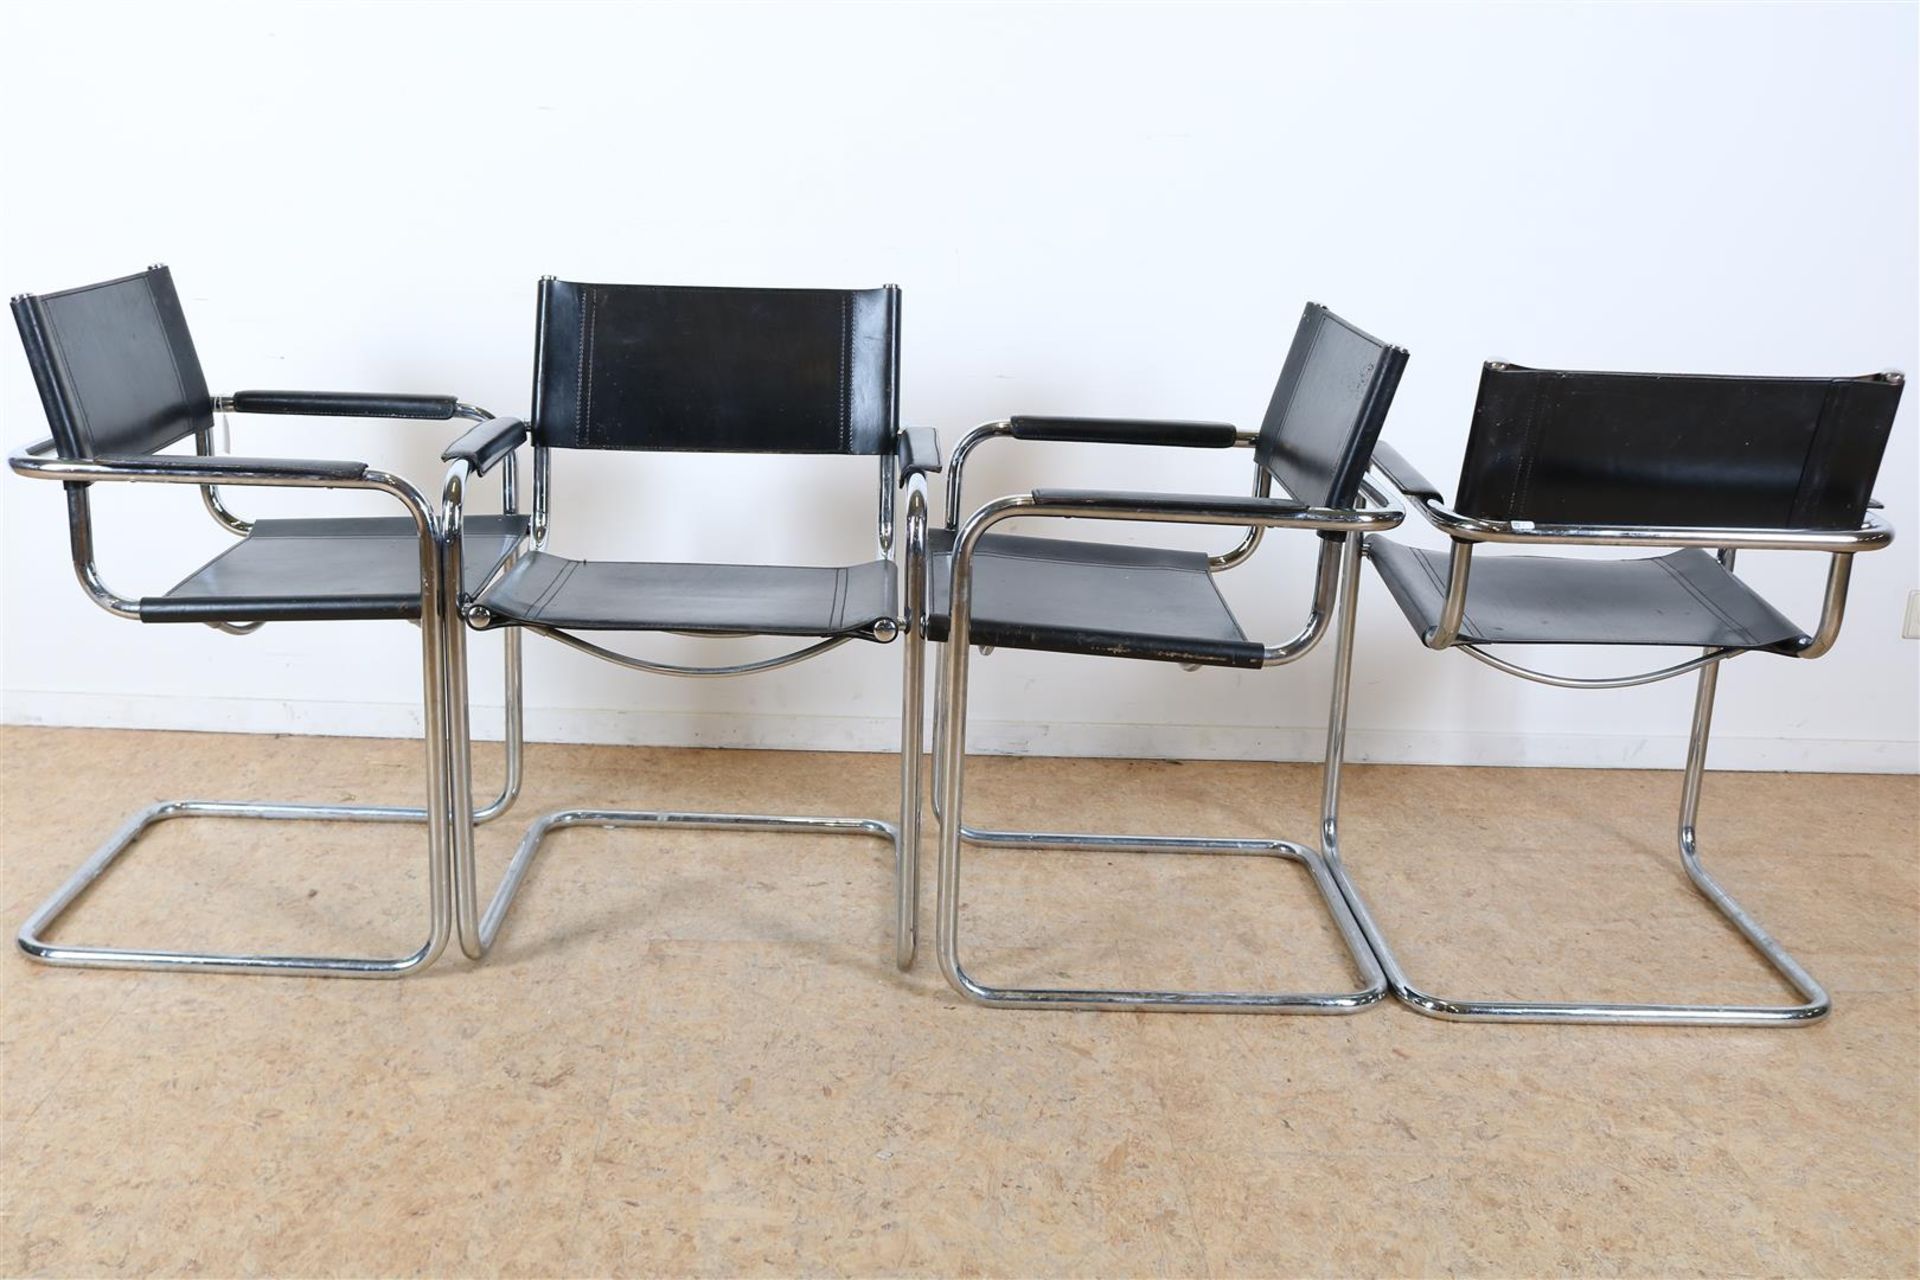 Series of 5 armchairs upholstered in black leather on a chrome tube base, after designer Marcel - Image 4 of 6